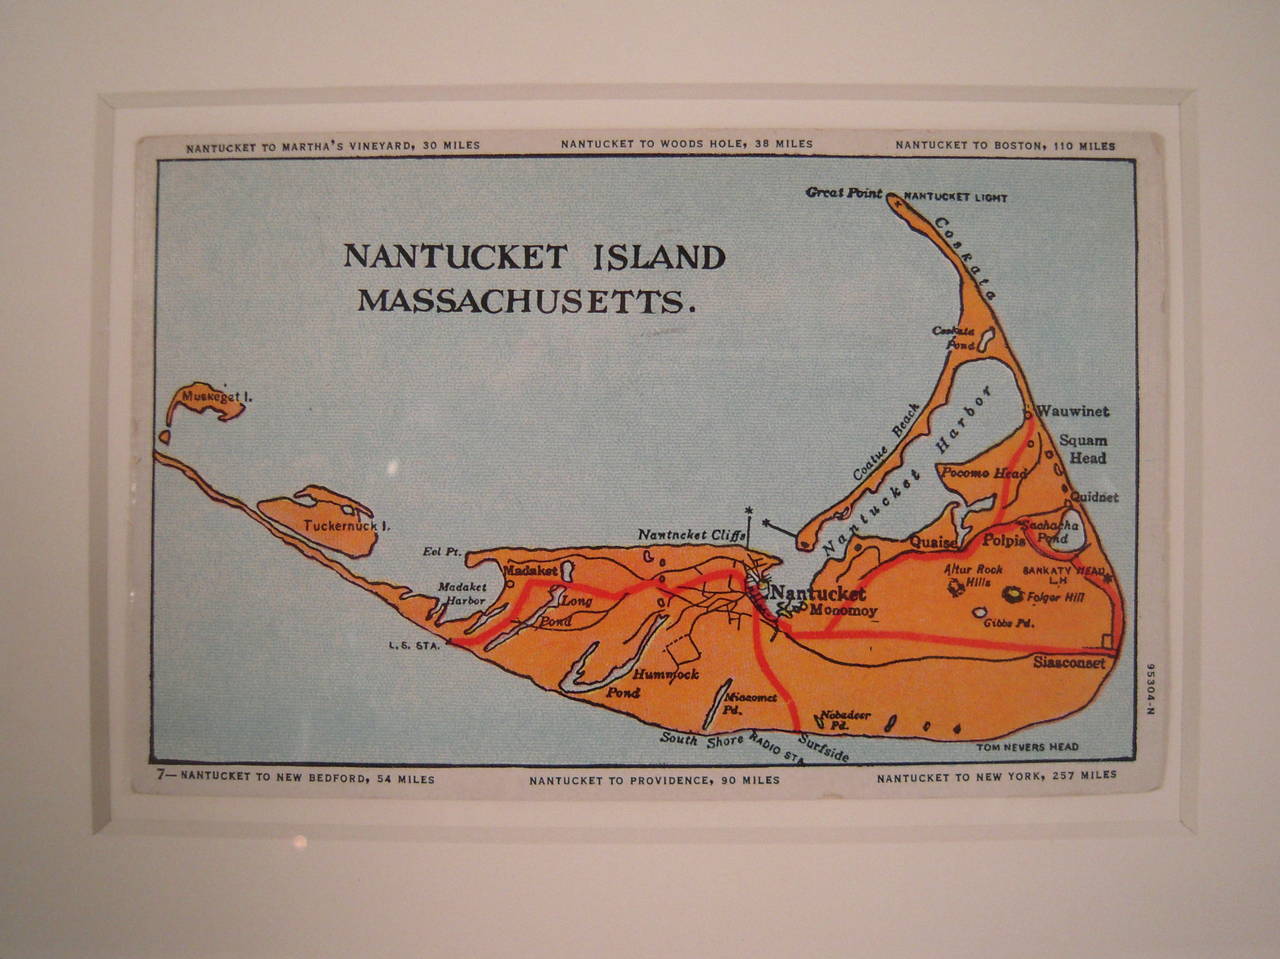 A vintage map postcard of Nantucket, circa 1952, printed in orange and red on light blue with black text identifying locations and distances of the island to surrounding areas, including Boston, New York, Wood's Hole and Martha's Vineyard. New, high